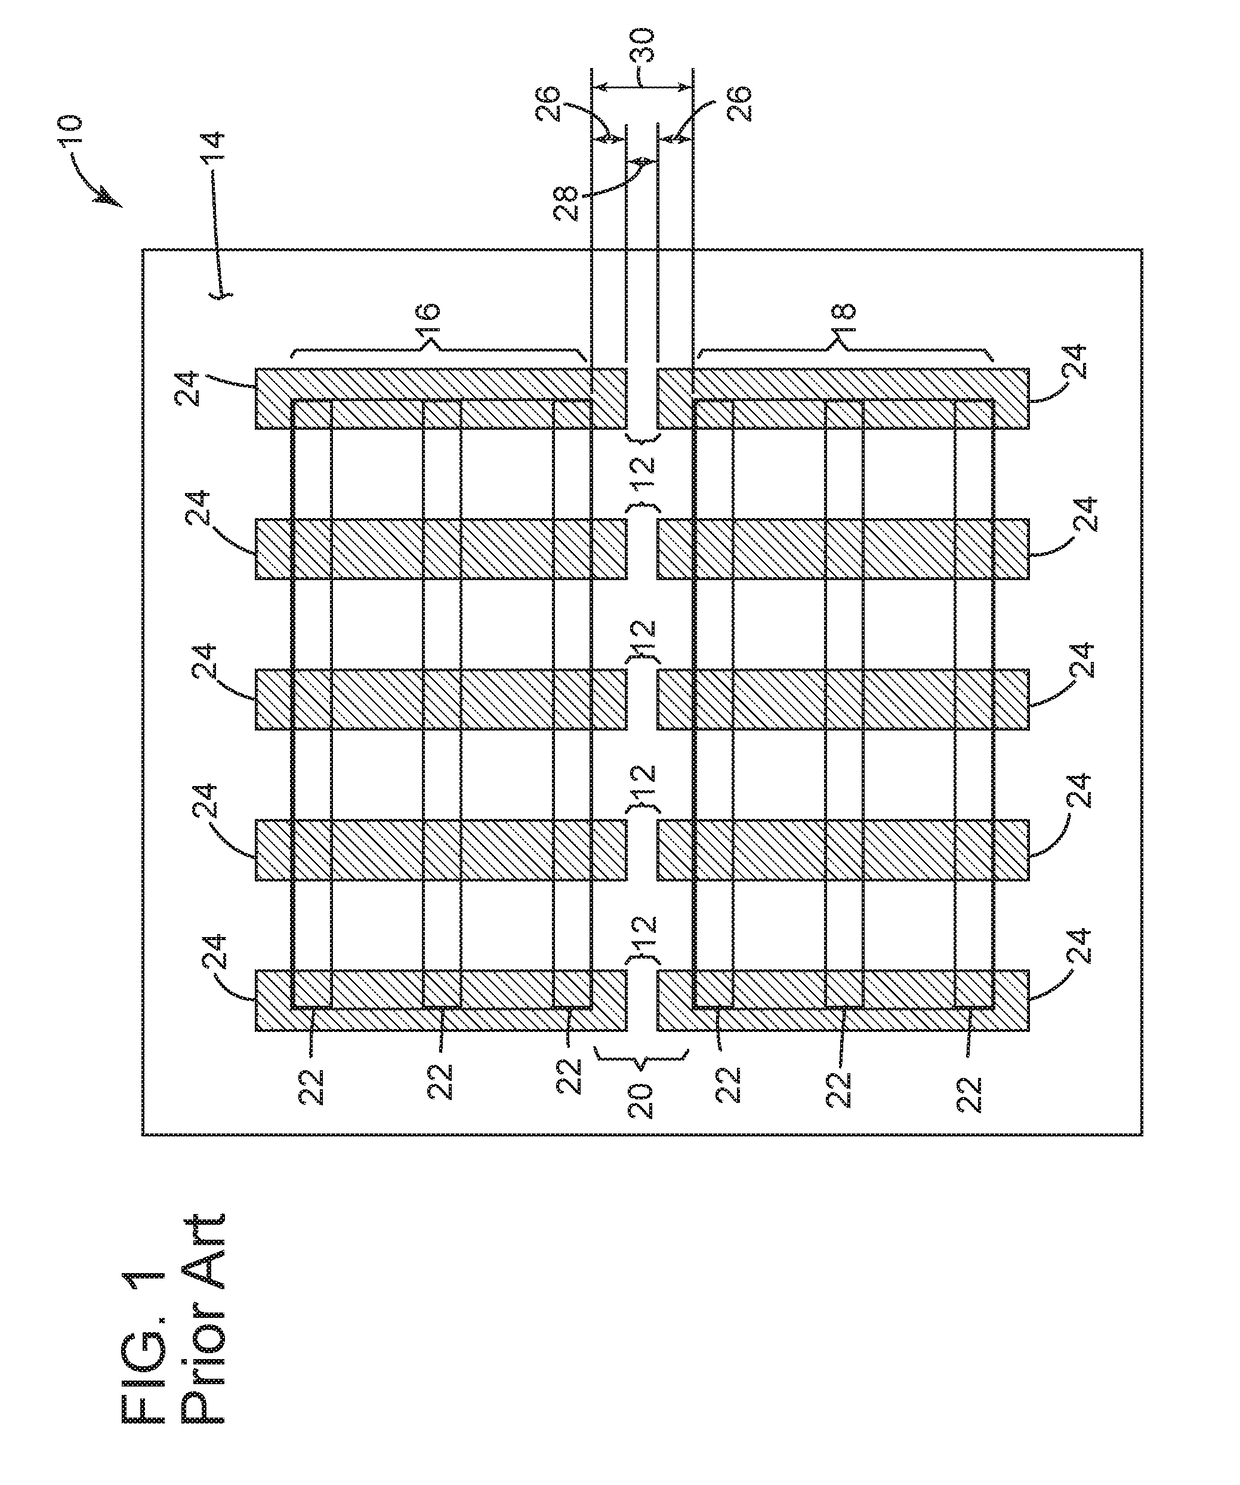 Methods of forming a CT pillar between gate structures in a semiconductor